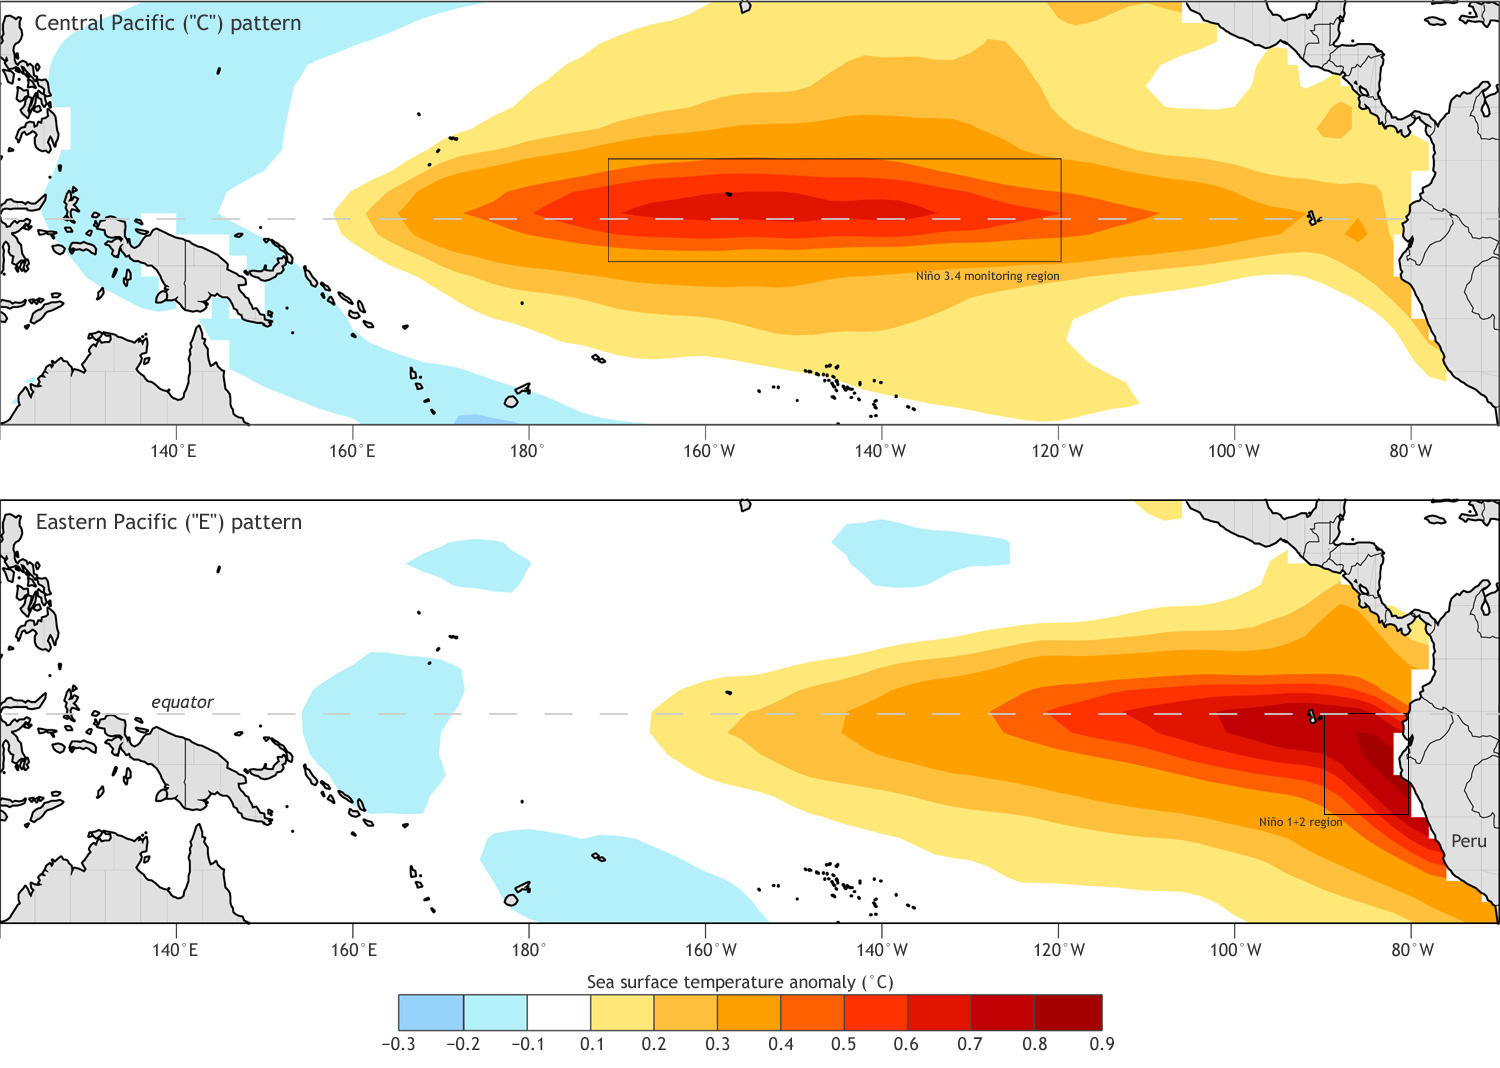 One forecaster's view on extreme El Niño in the eastern 